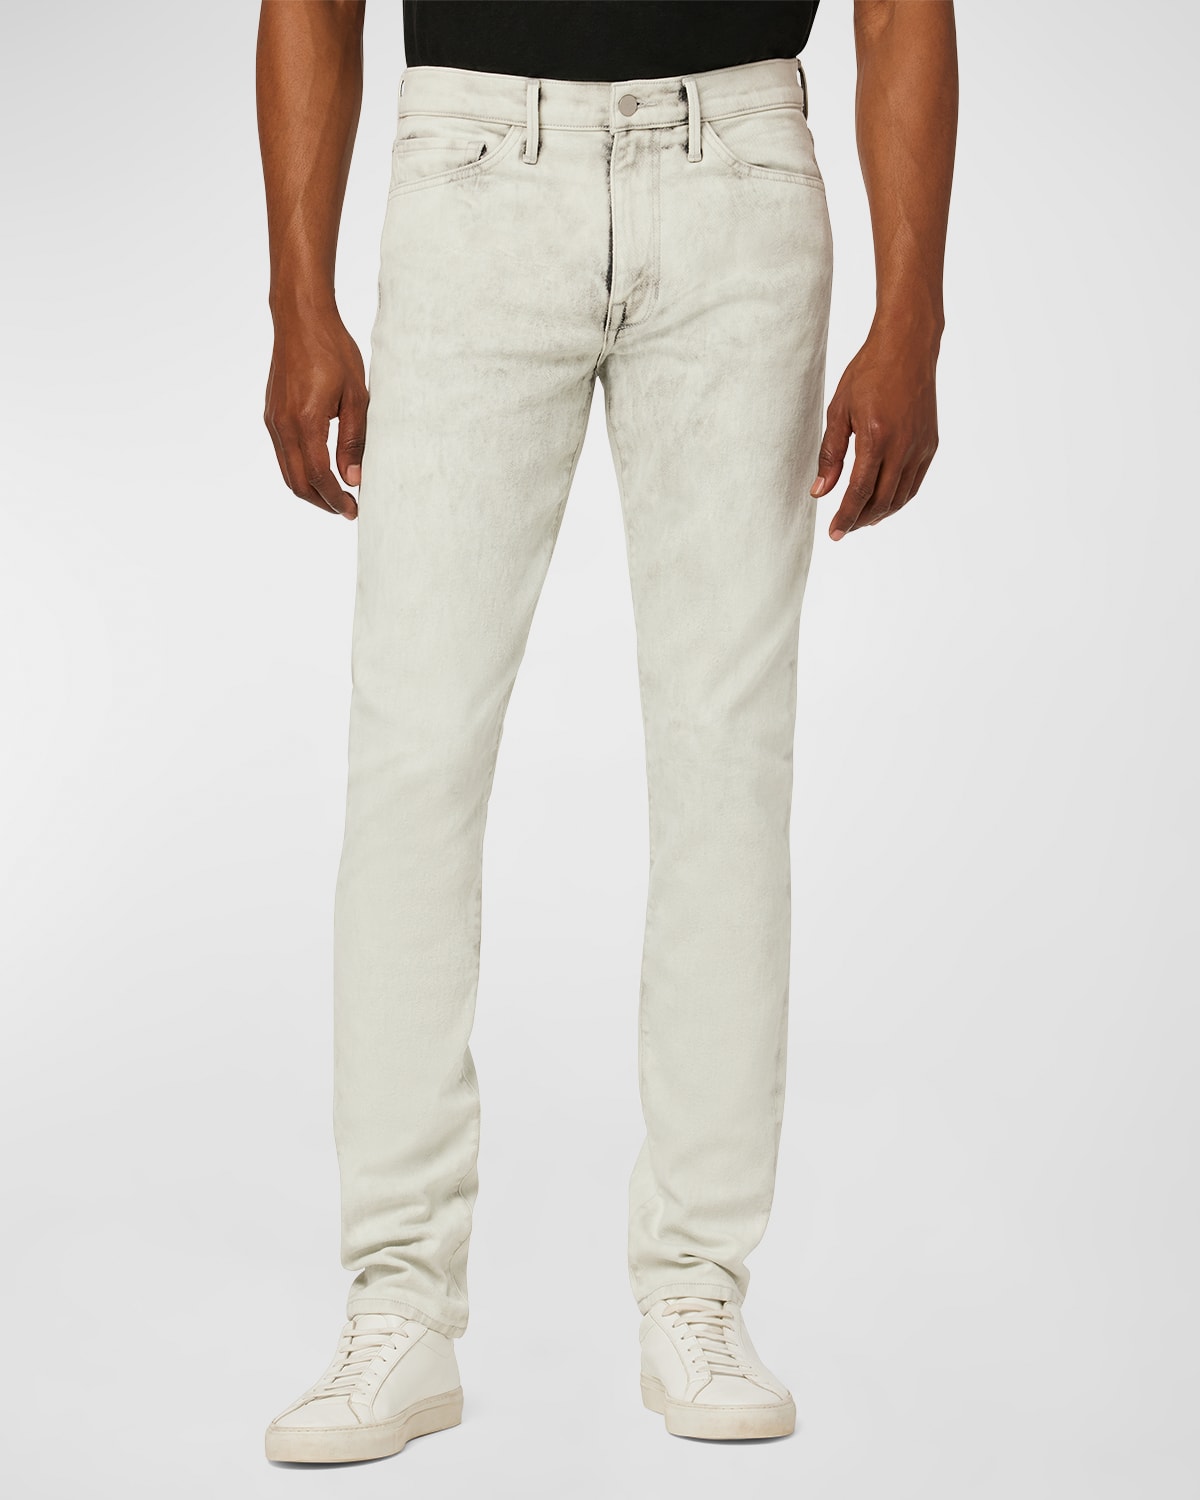 Men's The Dean Slim Tapered Jeans